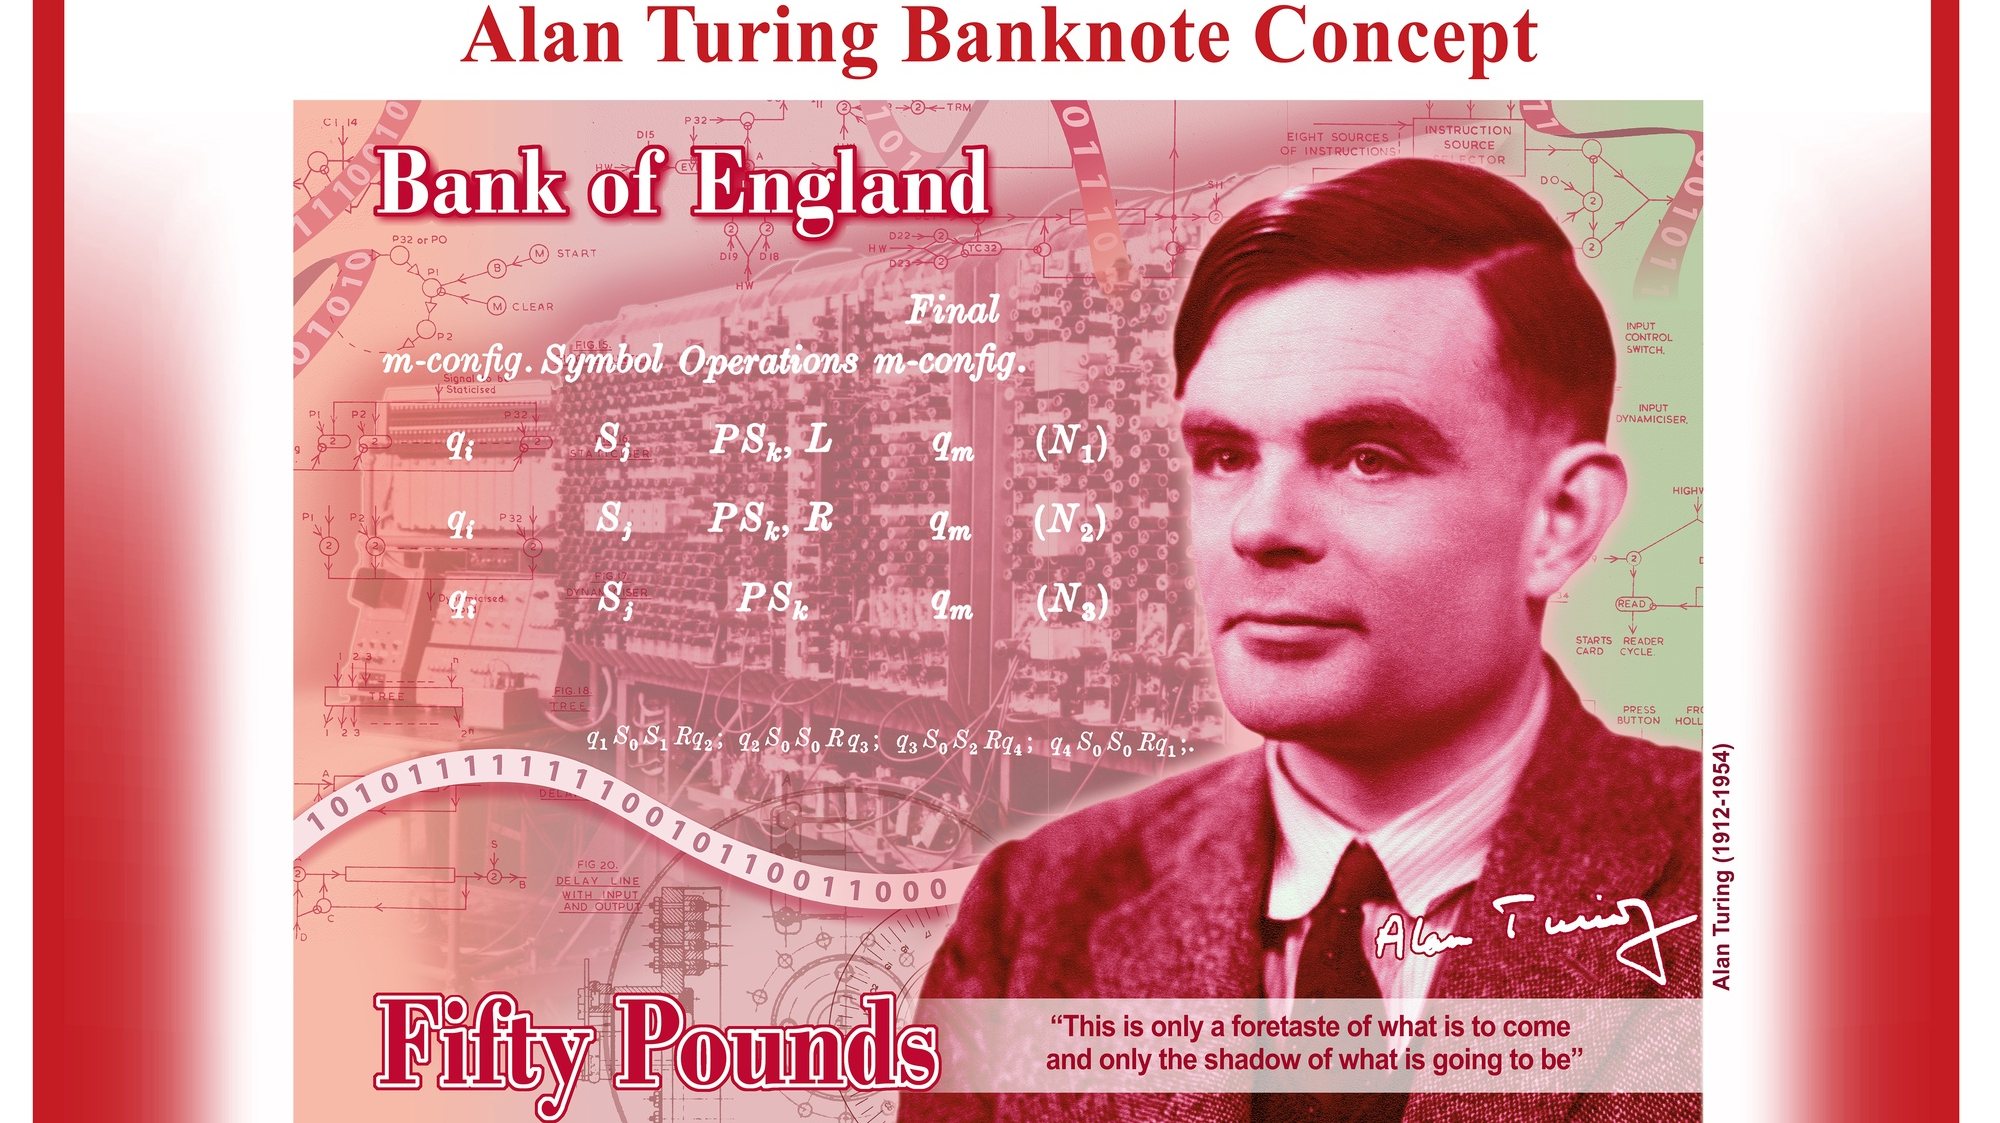 epa07718246 An undated handout photo made available by the British Bank of England on 15 July 2019 showing the new concept image design of the Bank of England&#039;s 50 GBP note featuring British computer pioneer and codebreaker Alan Turing. Bank of England Governor, Mark Carney, announced that Alan Turing will appear on the new polymer note. Alan Turing was an outstanding mathematician whose work has had an enormous impact on how we live today. As the father of computerscience and artificial intelligence, as well as war hero, Alan Turing’s contributions were far ranging and path breaking. Turing is a giant on whose shoulders so many now stand.”Alan Turing provided the theoretical underpinnings for the modern computer. While best known for his work devising code-breaking machines during WWII, Turing played a pivotal role in the development of early computers first at the National Physical Laboratory and later at the University of Manchester. EPA/BANK OF ENGLAND / HANDOUT MANDATORY CREDIT HANDOUT EDITORIAL USE ONLY/NO SALES